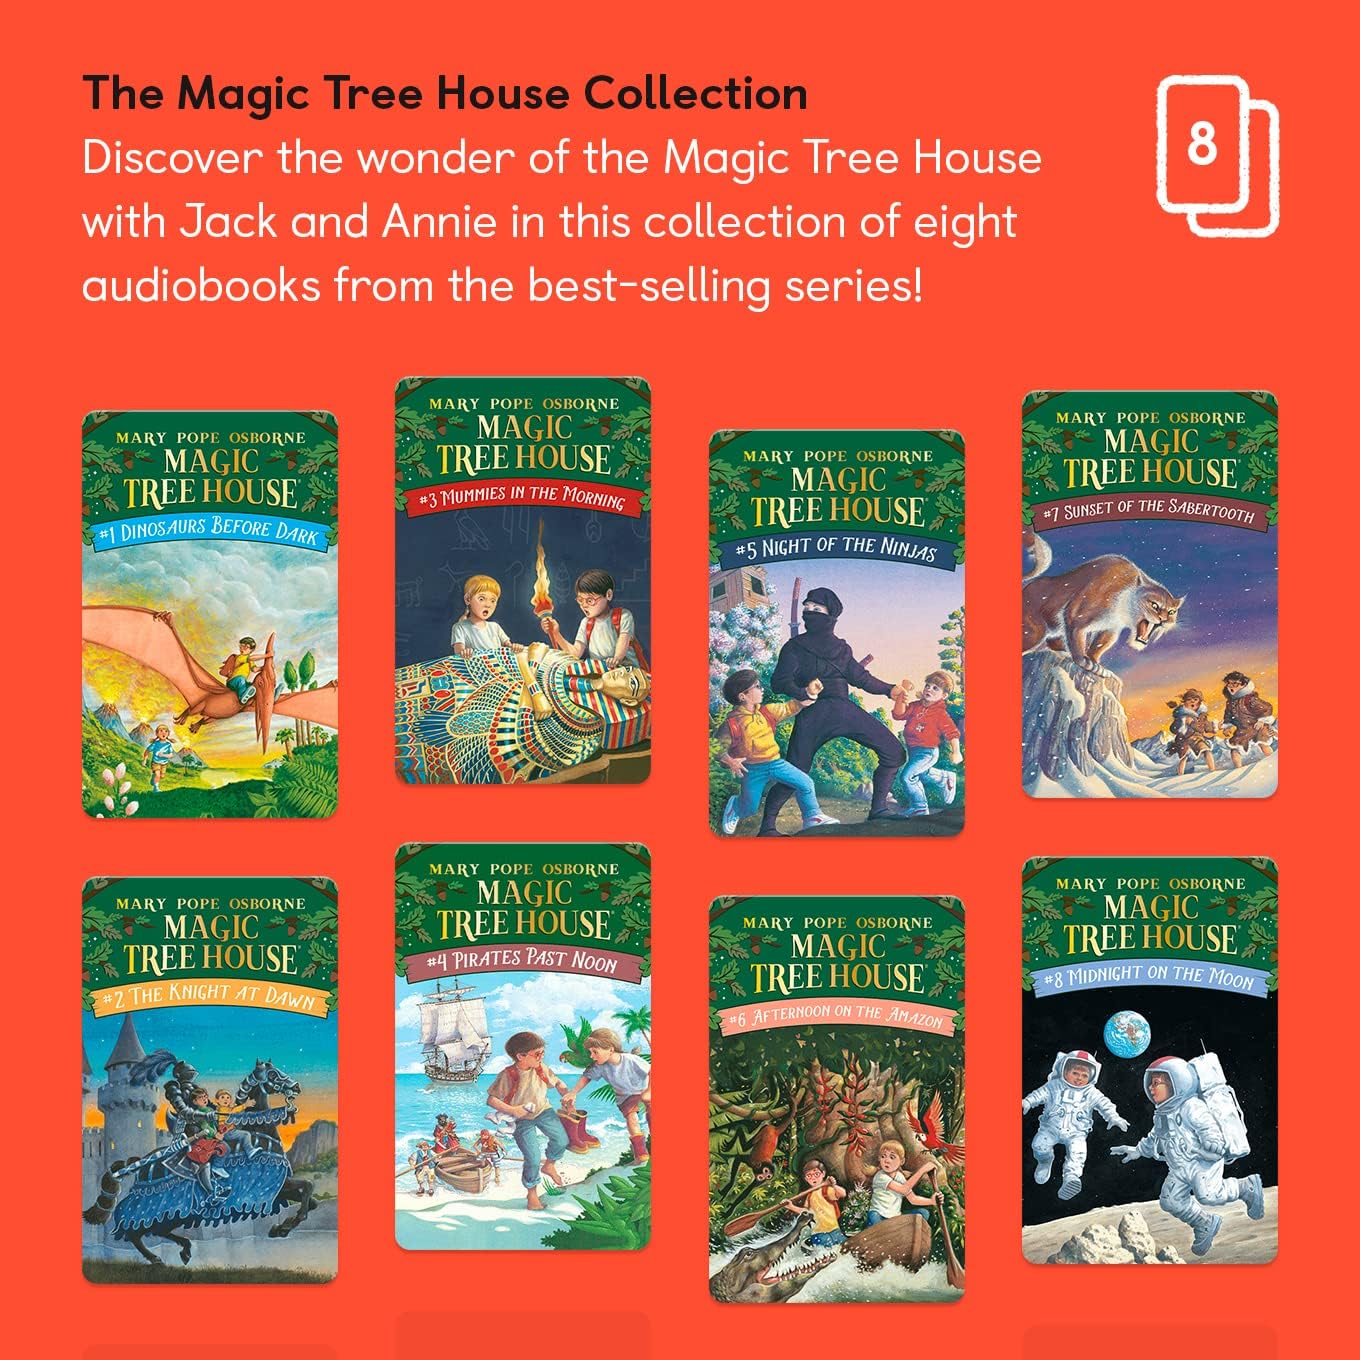 The Magic Treehouse Collection